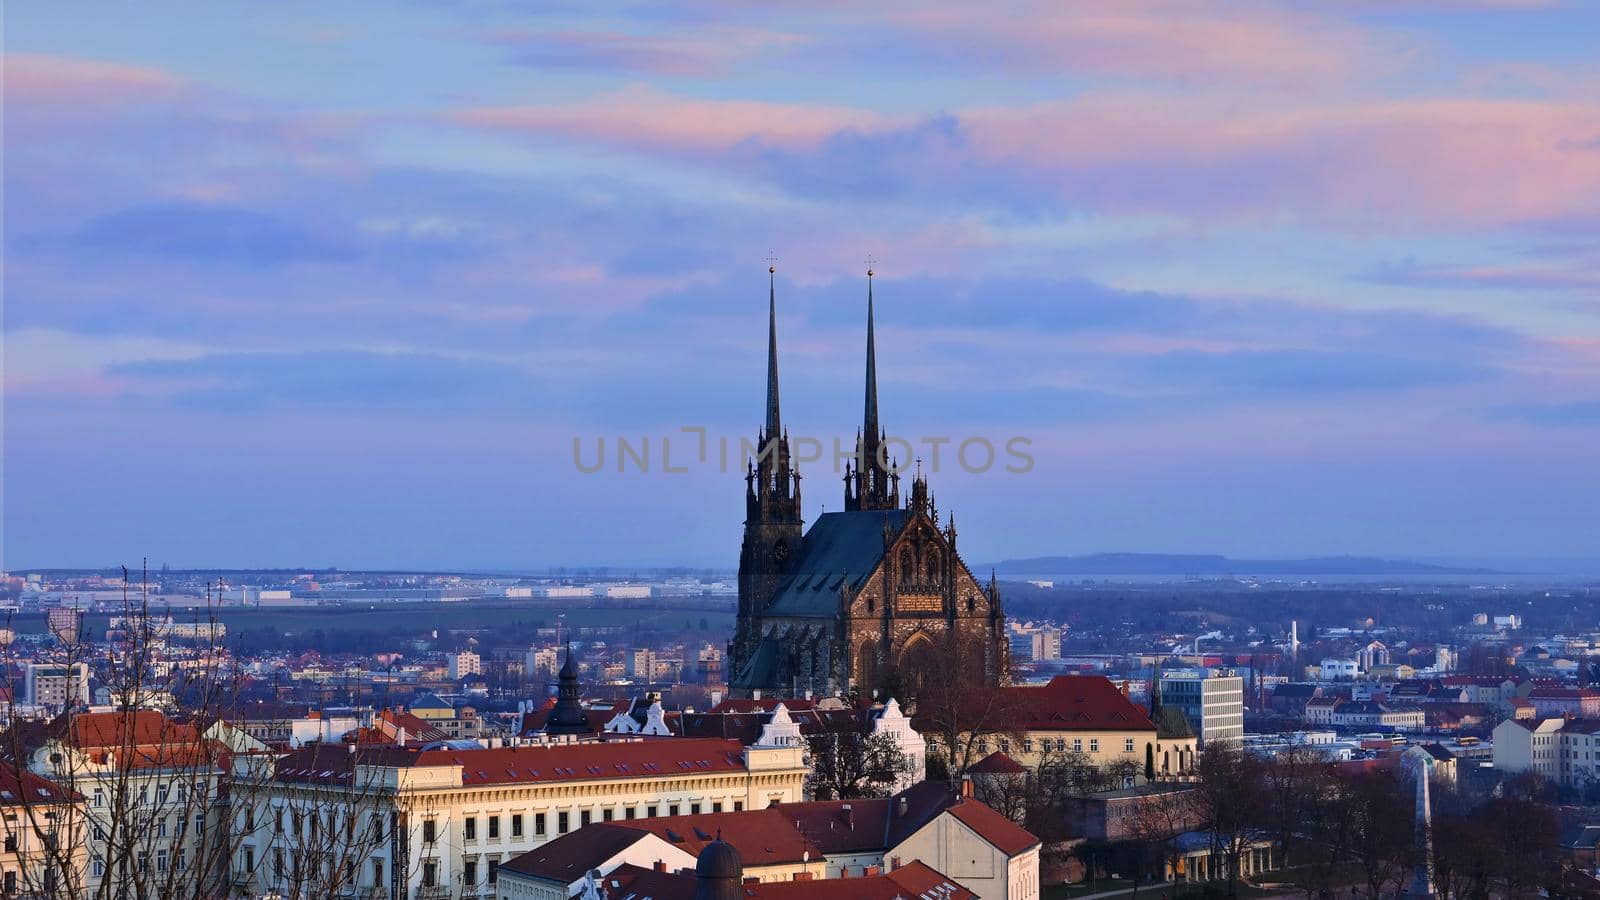 The city of Brno, Czech Republic-Europe. Top view of the city with monuments and roofs. by Montypeter